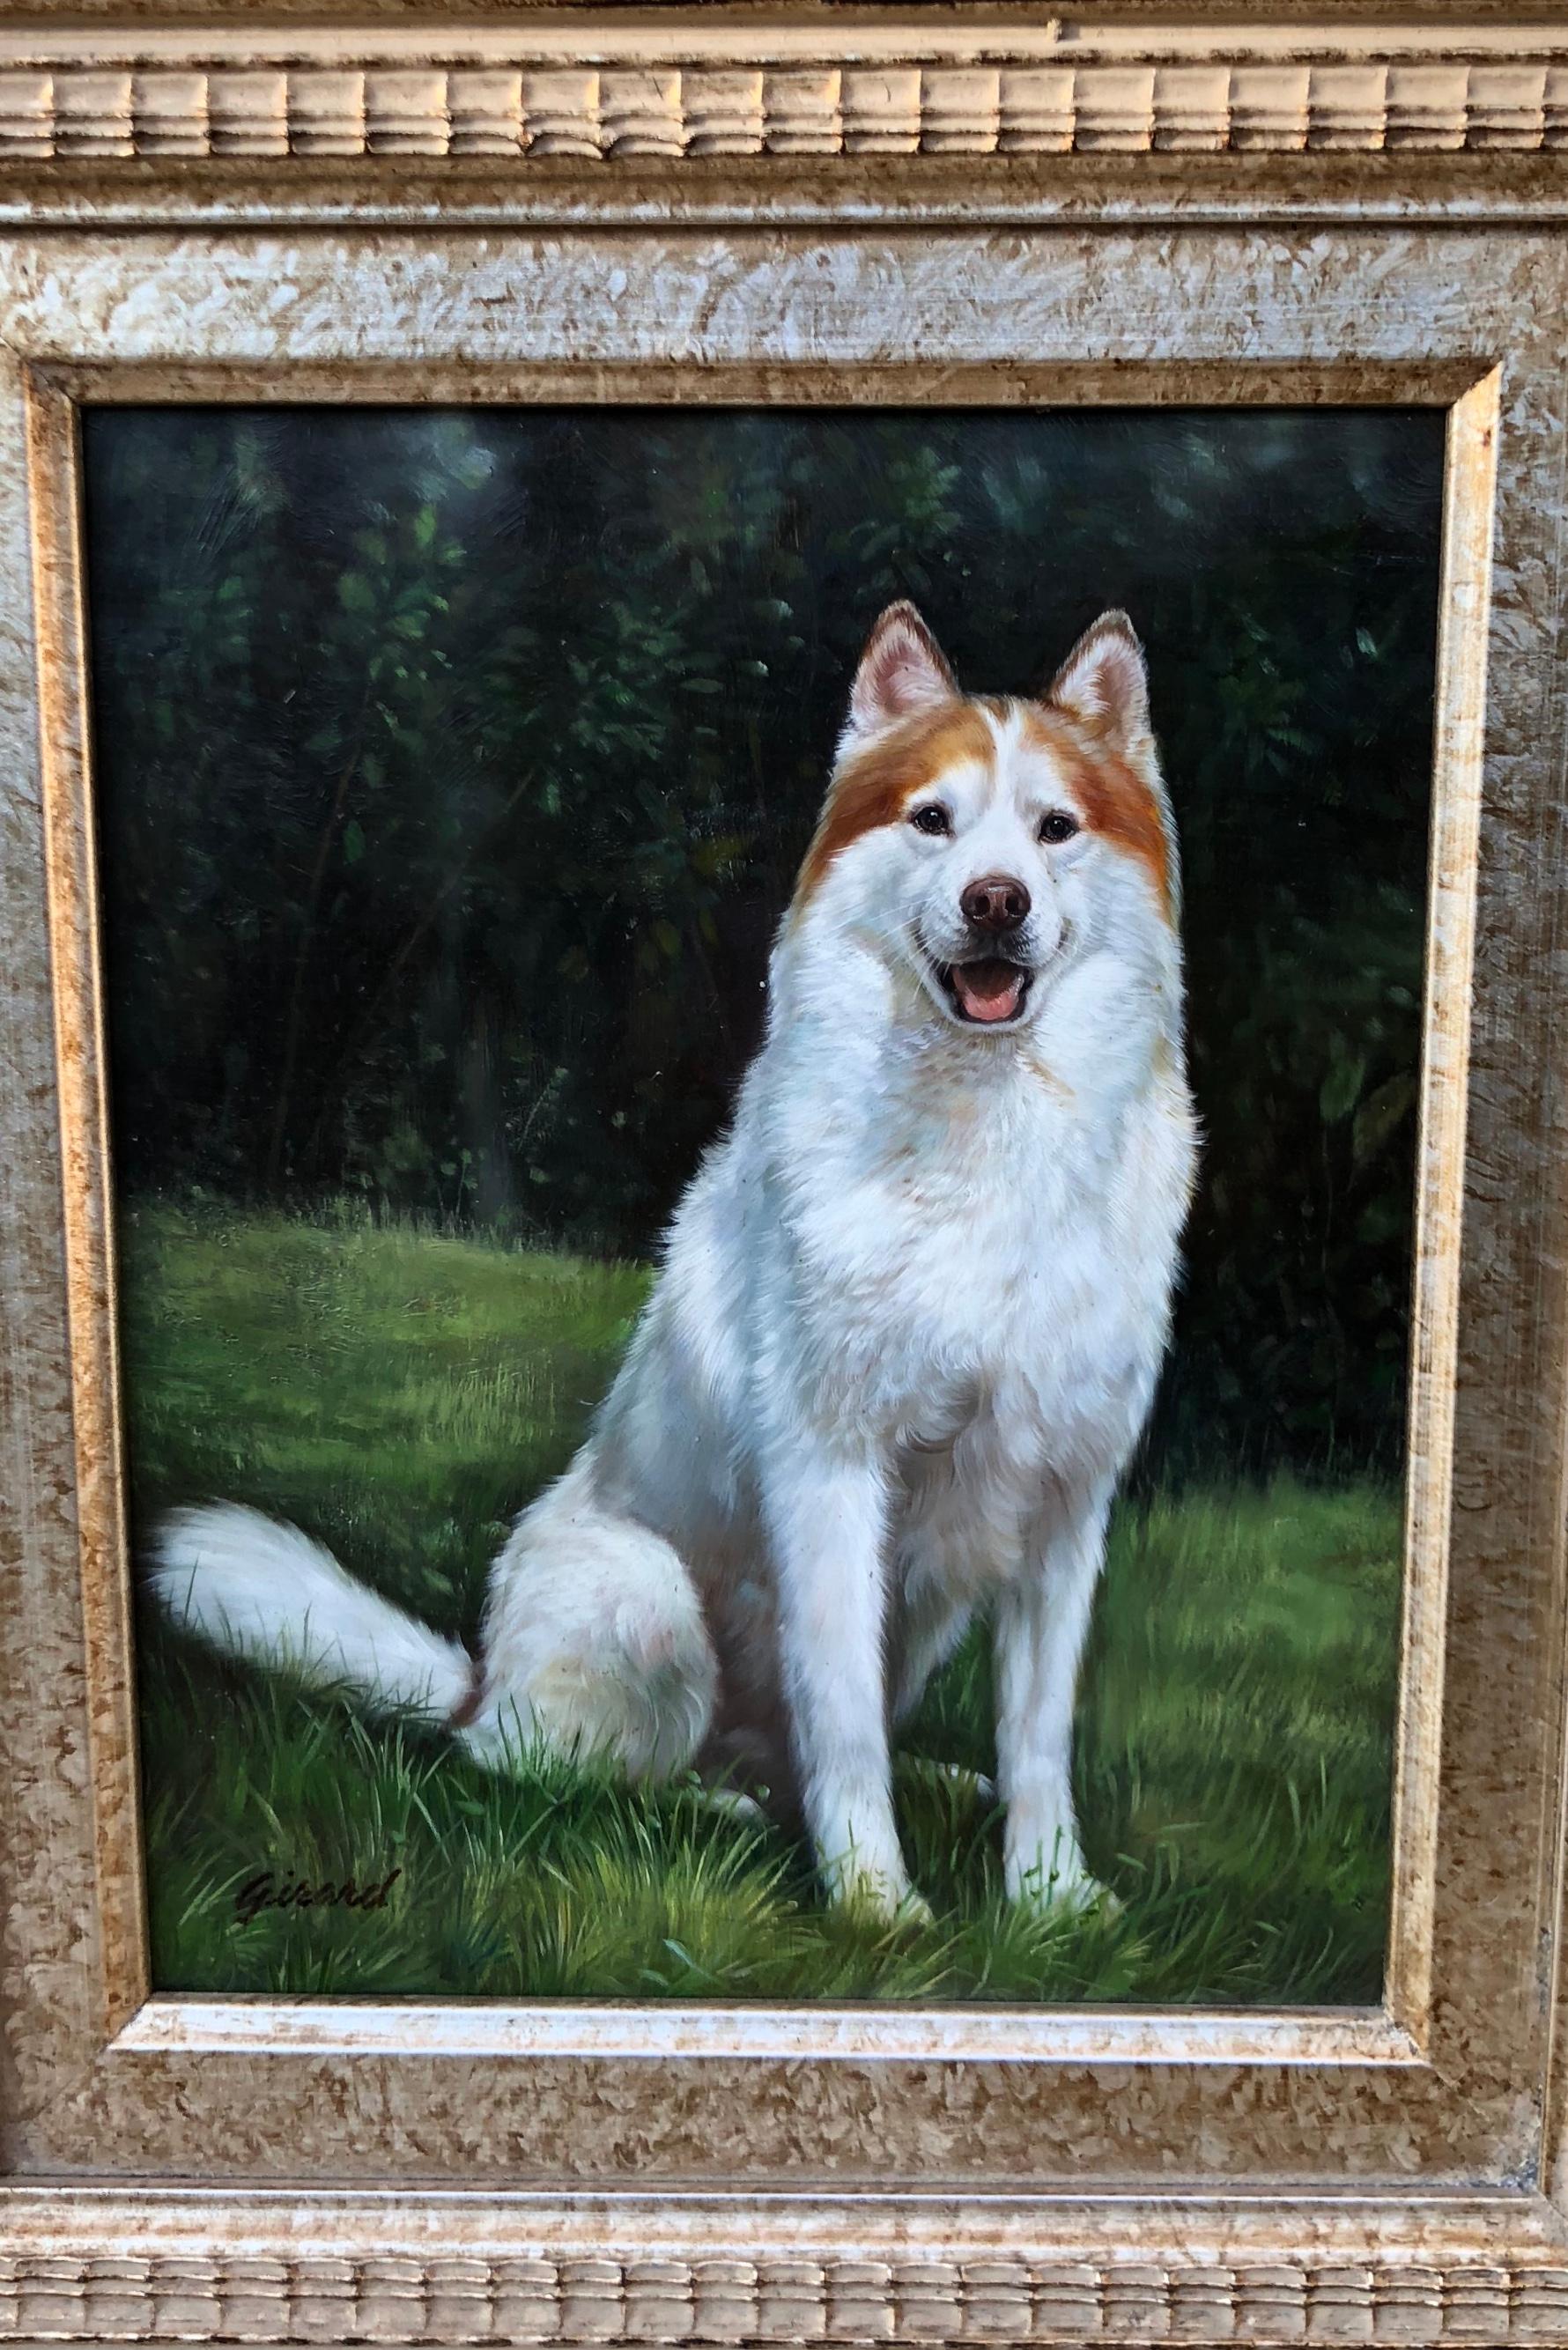 Masonite Excellent Quality Original Oil Painting of a Husky Dog by French Artist Girard